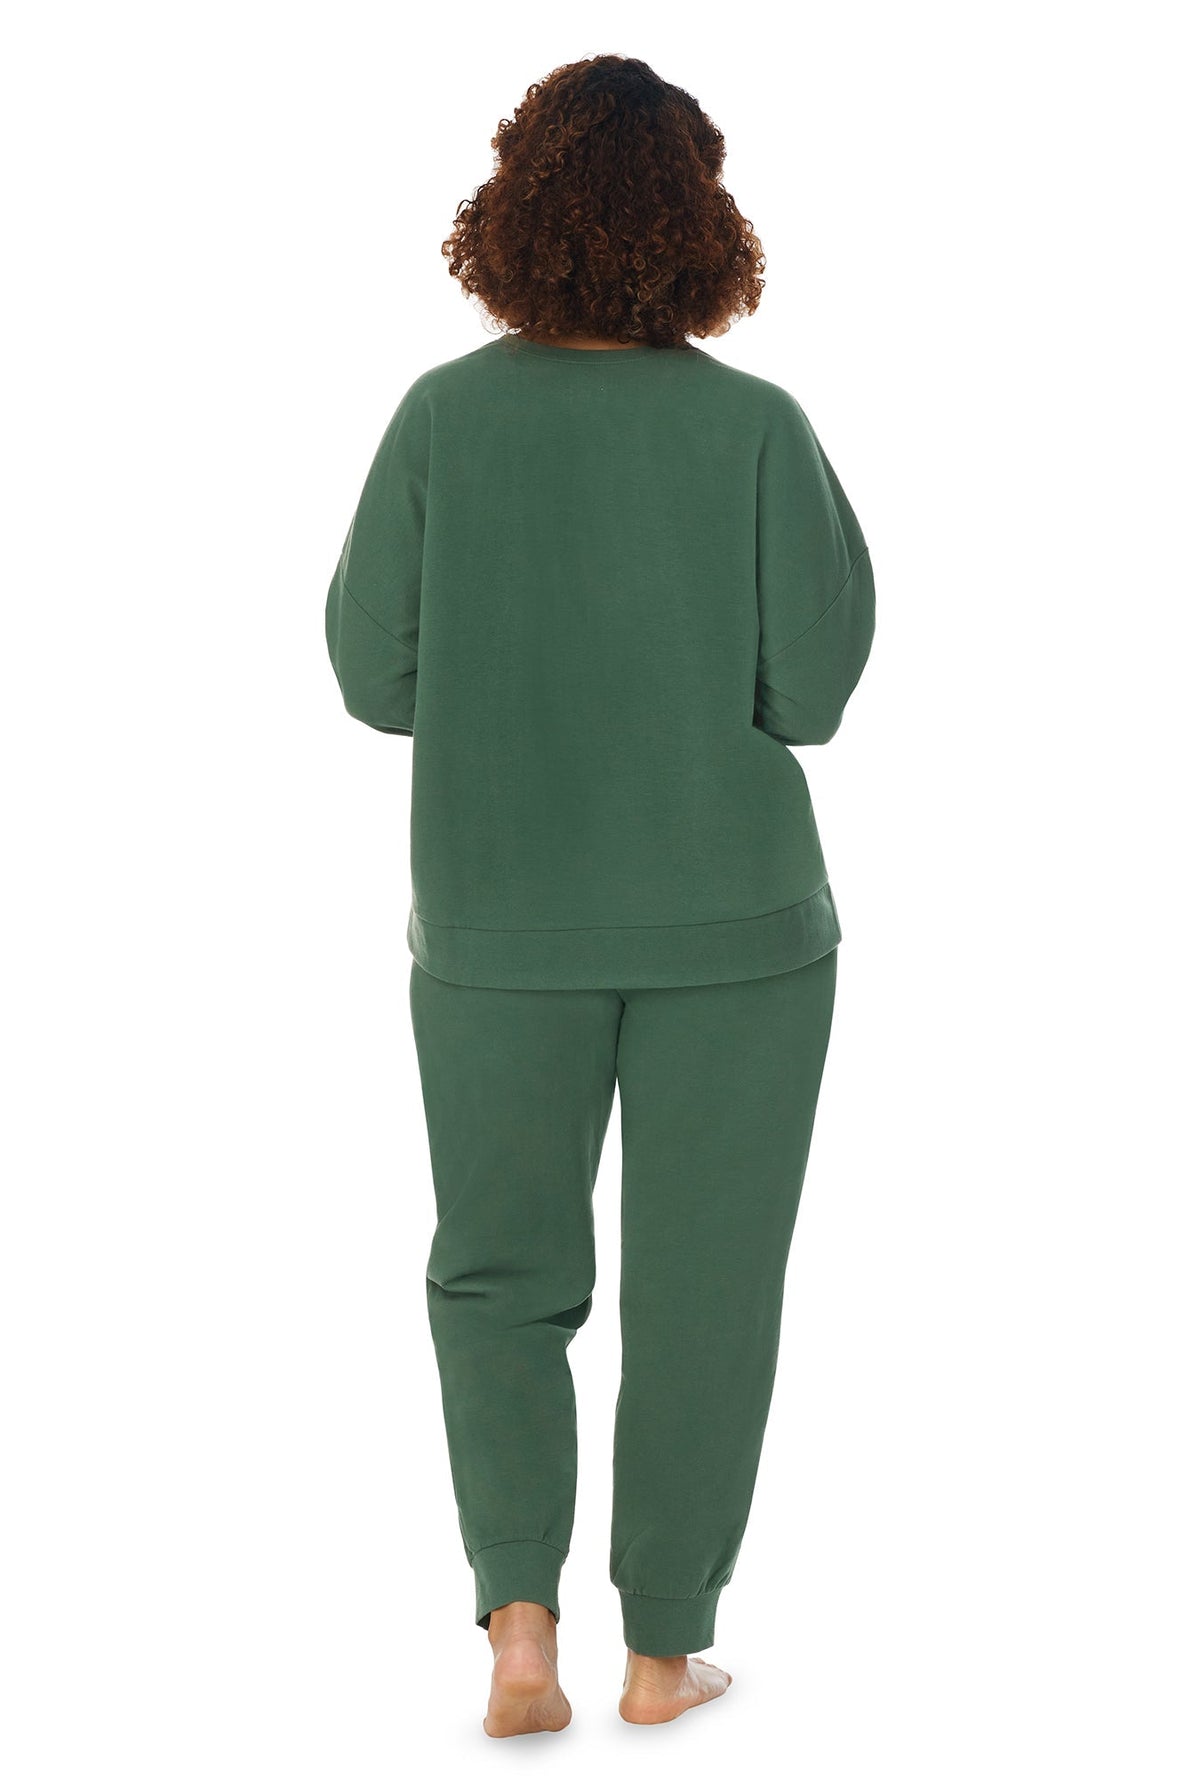 A lady wearing a green long sleeve crew embroidered plus size lounge set.